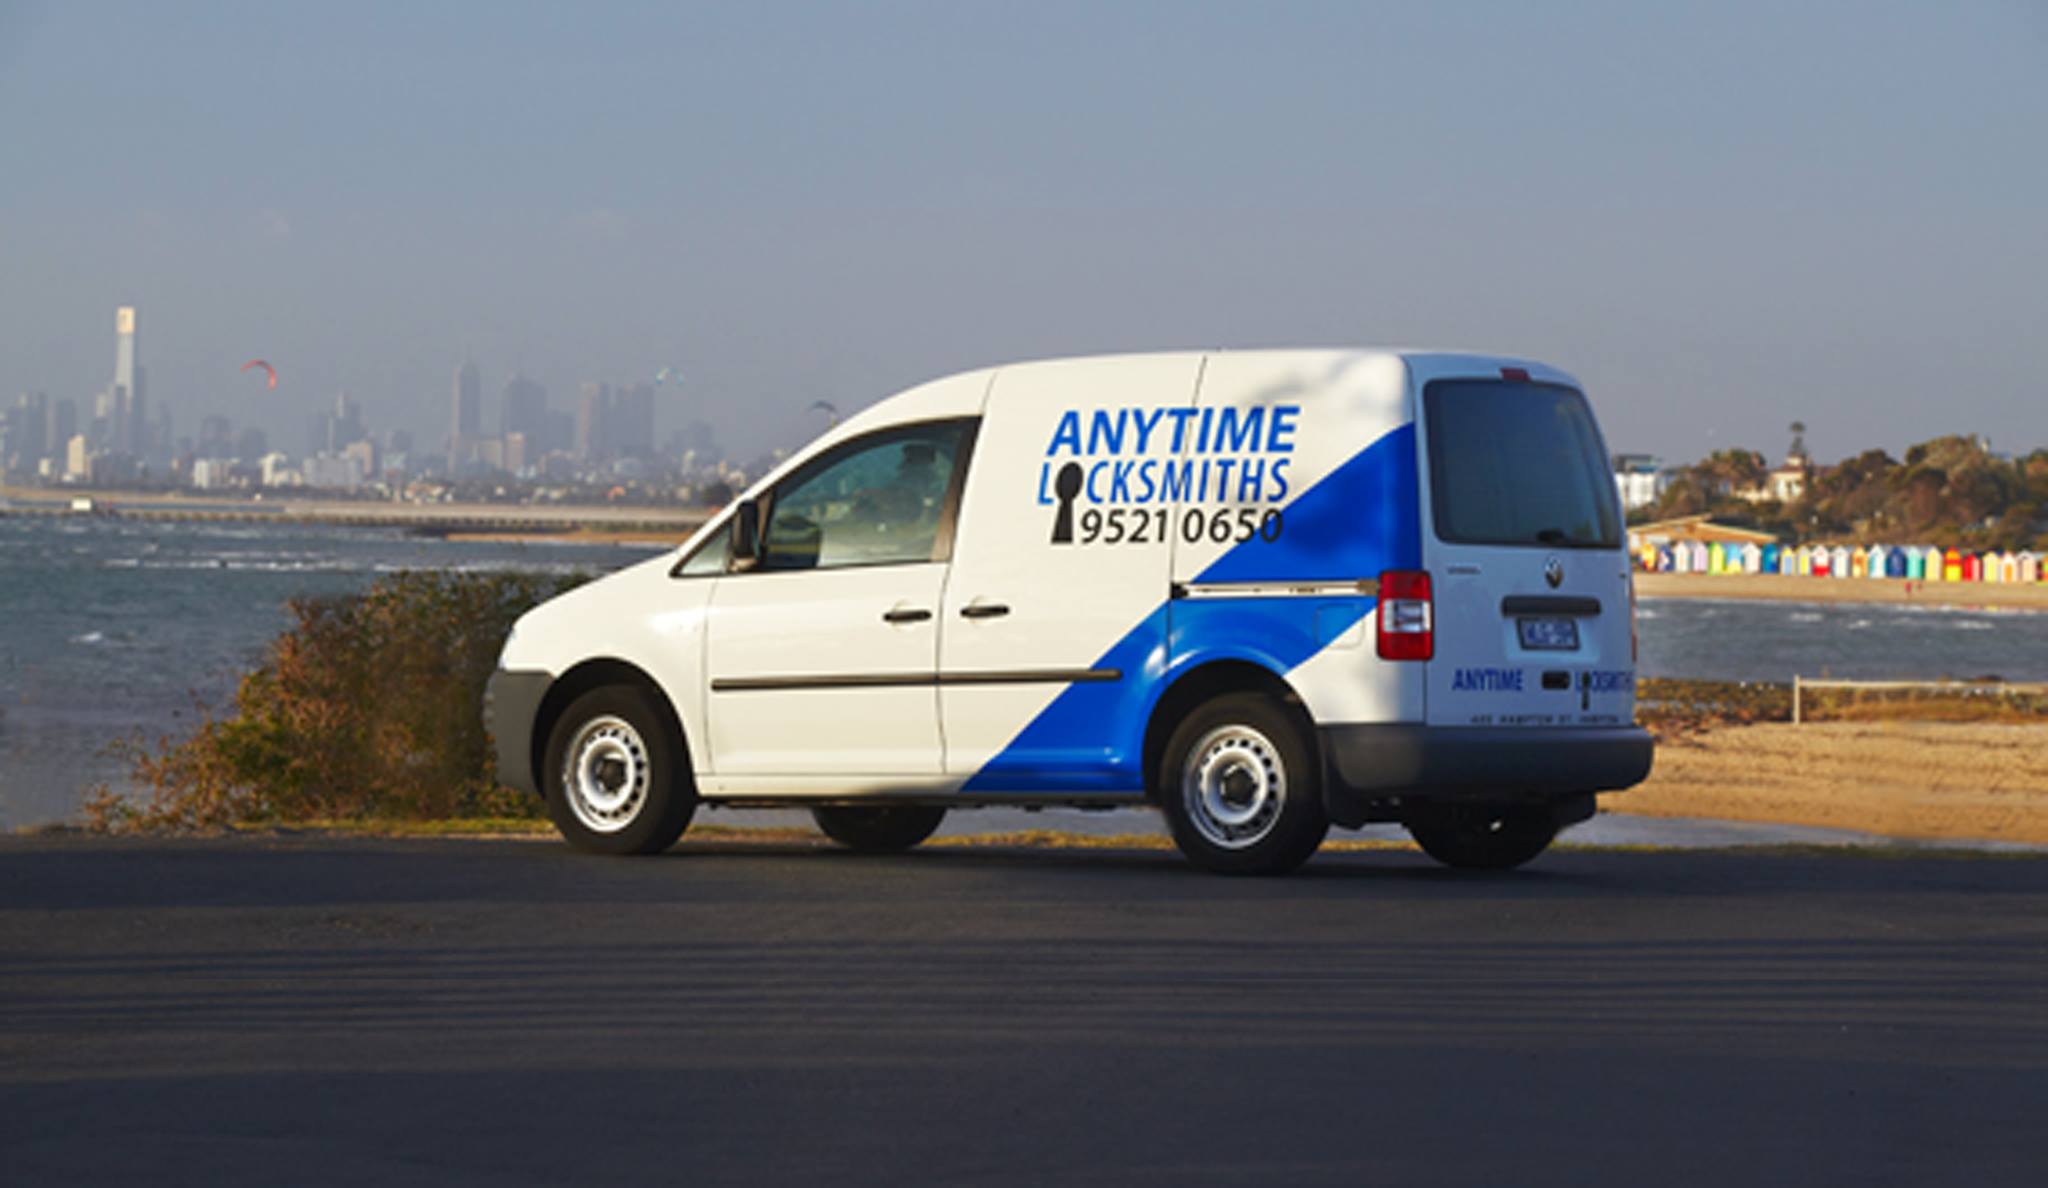 On Site Mobile Vehicle - Anytime Locksmiths